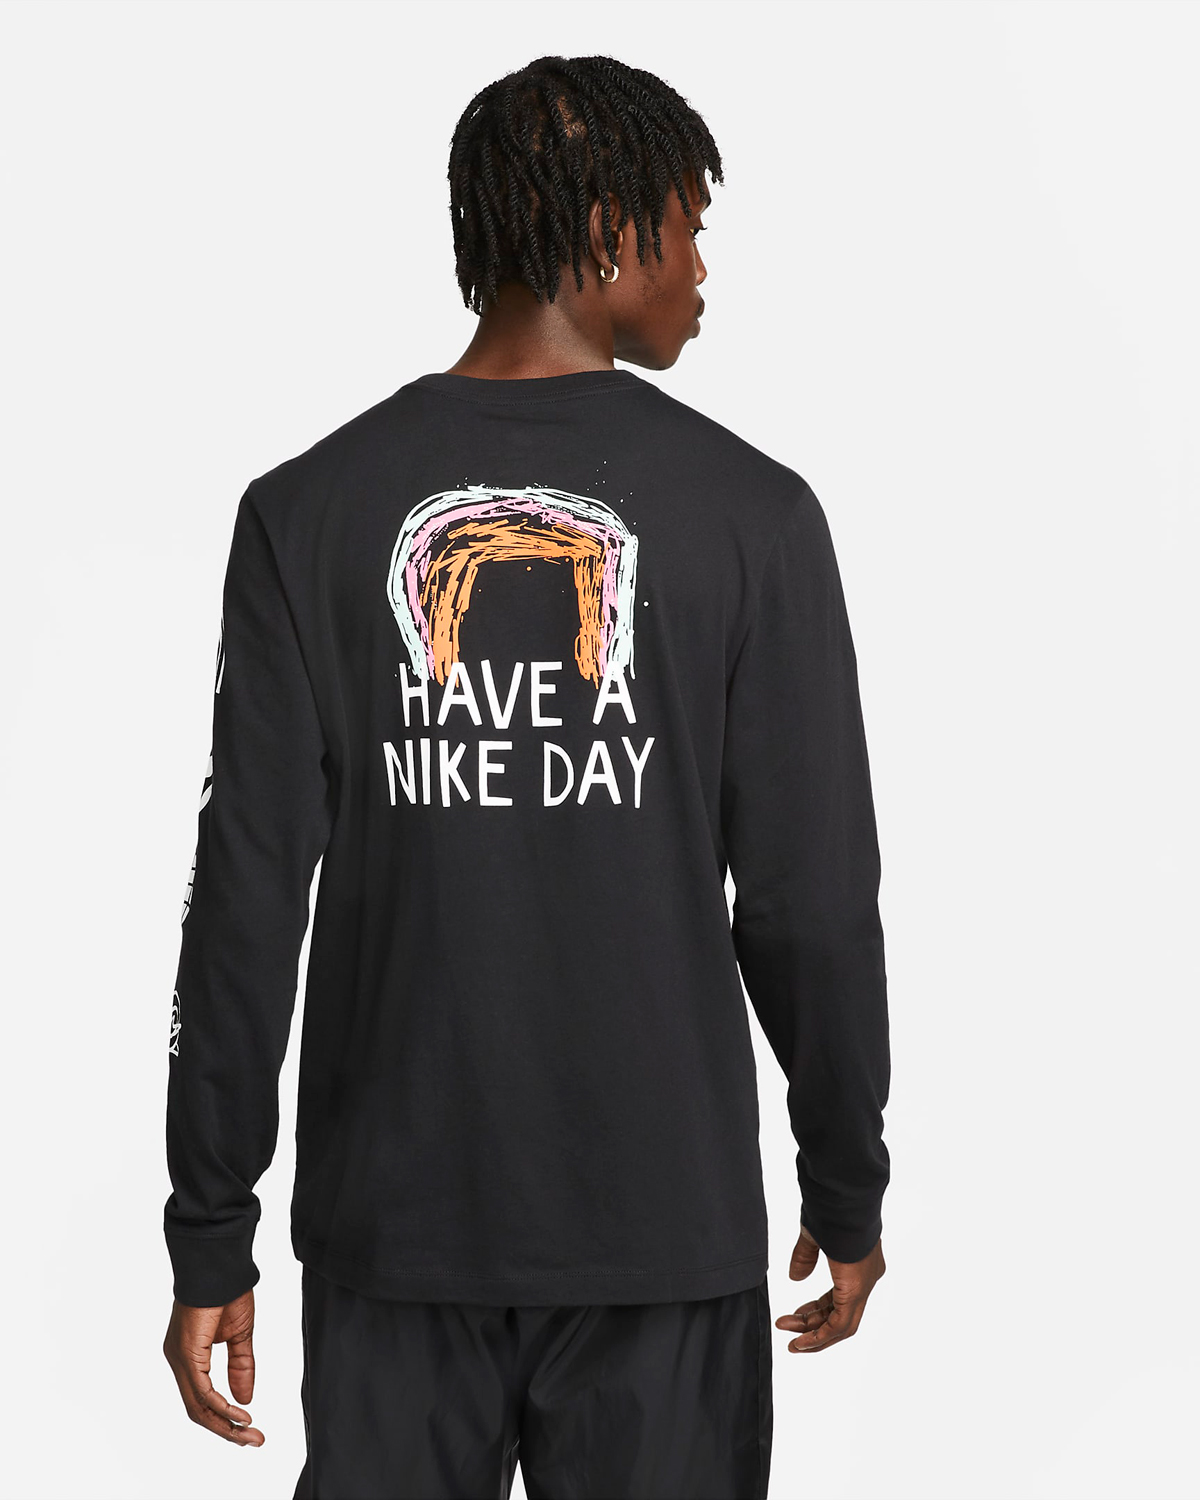 Have-A-Nike-Day-Long-Sleeve-T-Shirt-Black-White-2